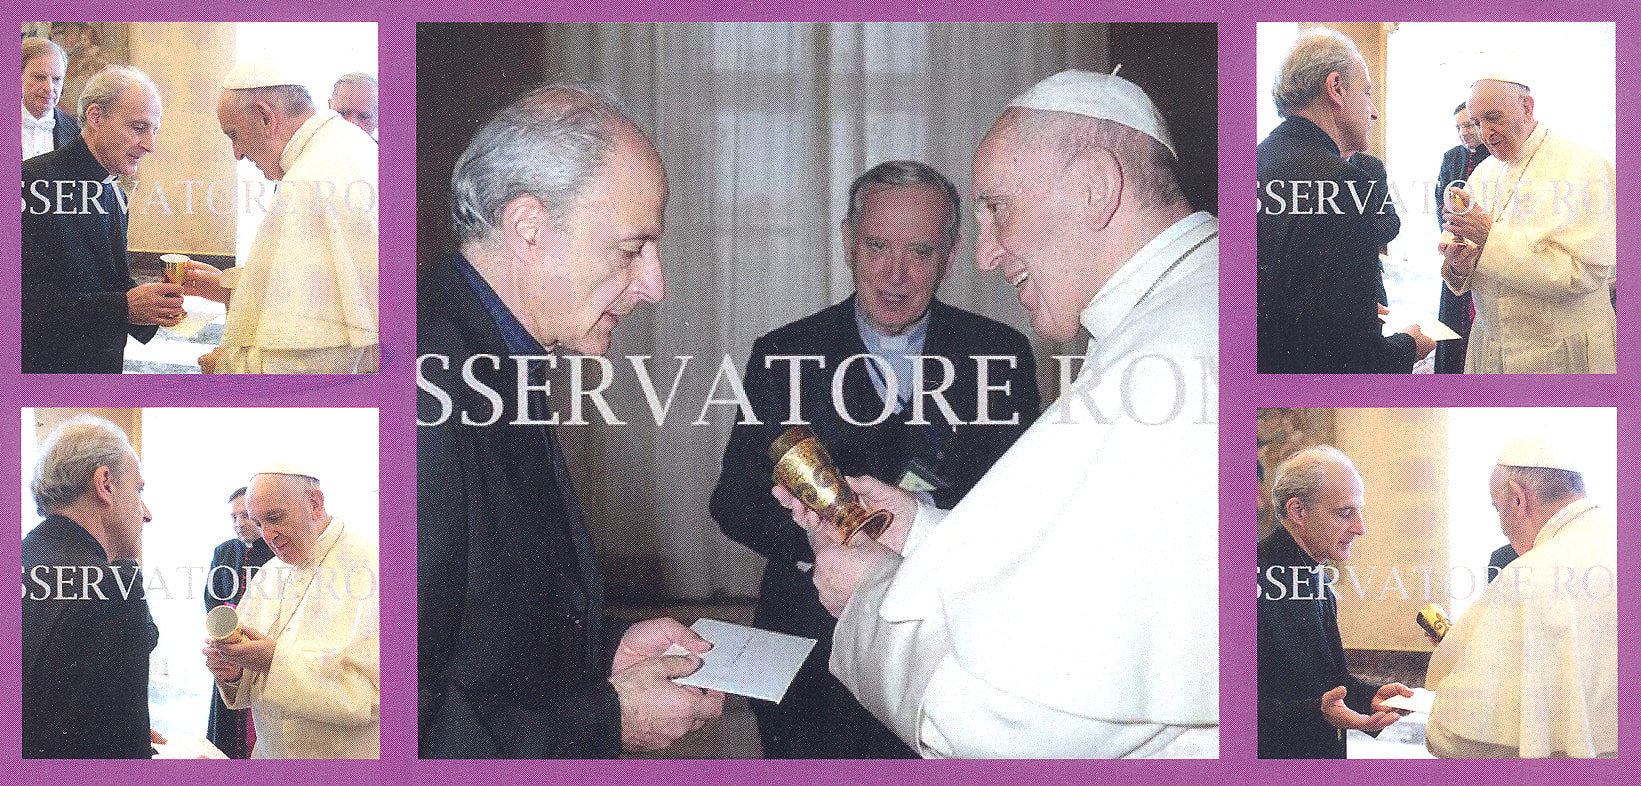 Father Andre Y Sebastian Mahanna arranged to have His Holiness Pope Francis accept a Barlock Chalice. The Chalice was presented to His Holiness Pope Francis by Can. Giuseppe Magrin during  The International Assembly of the Conference of the Aperolic Union of  the Clergy in the Hall of the Consistory in the Vatican.